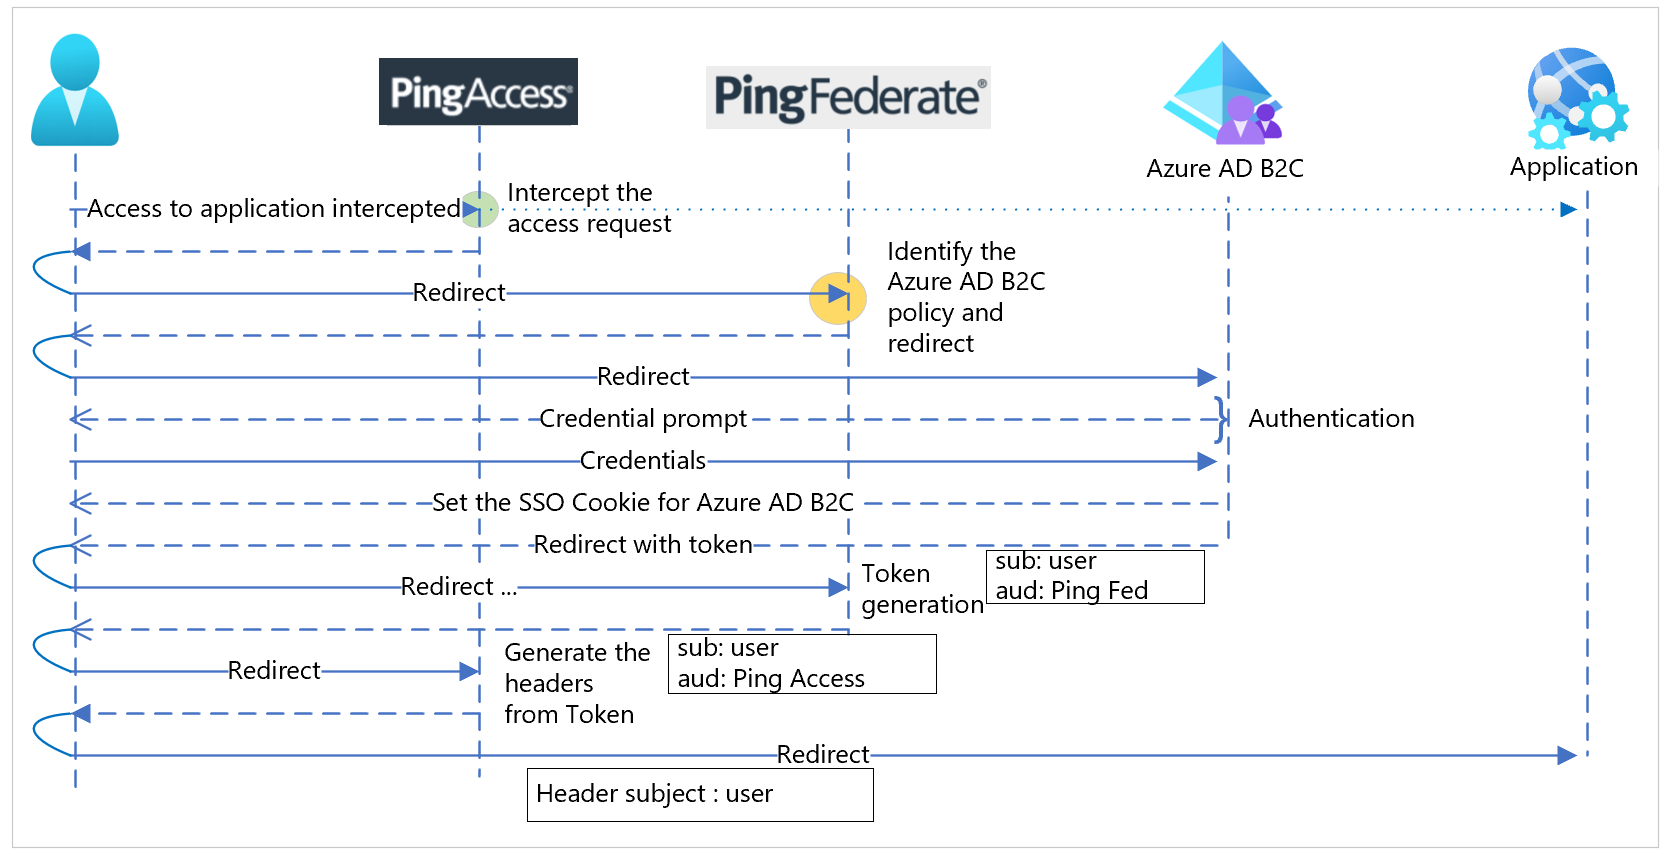 image shows the PingAccess and PingFederate workflow